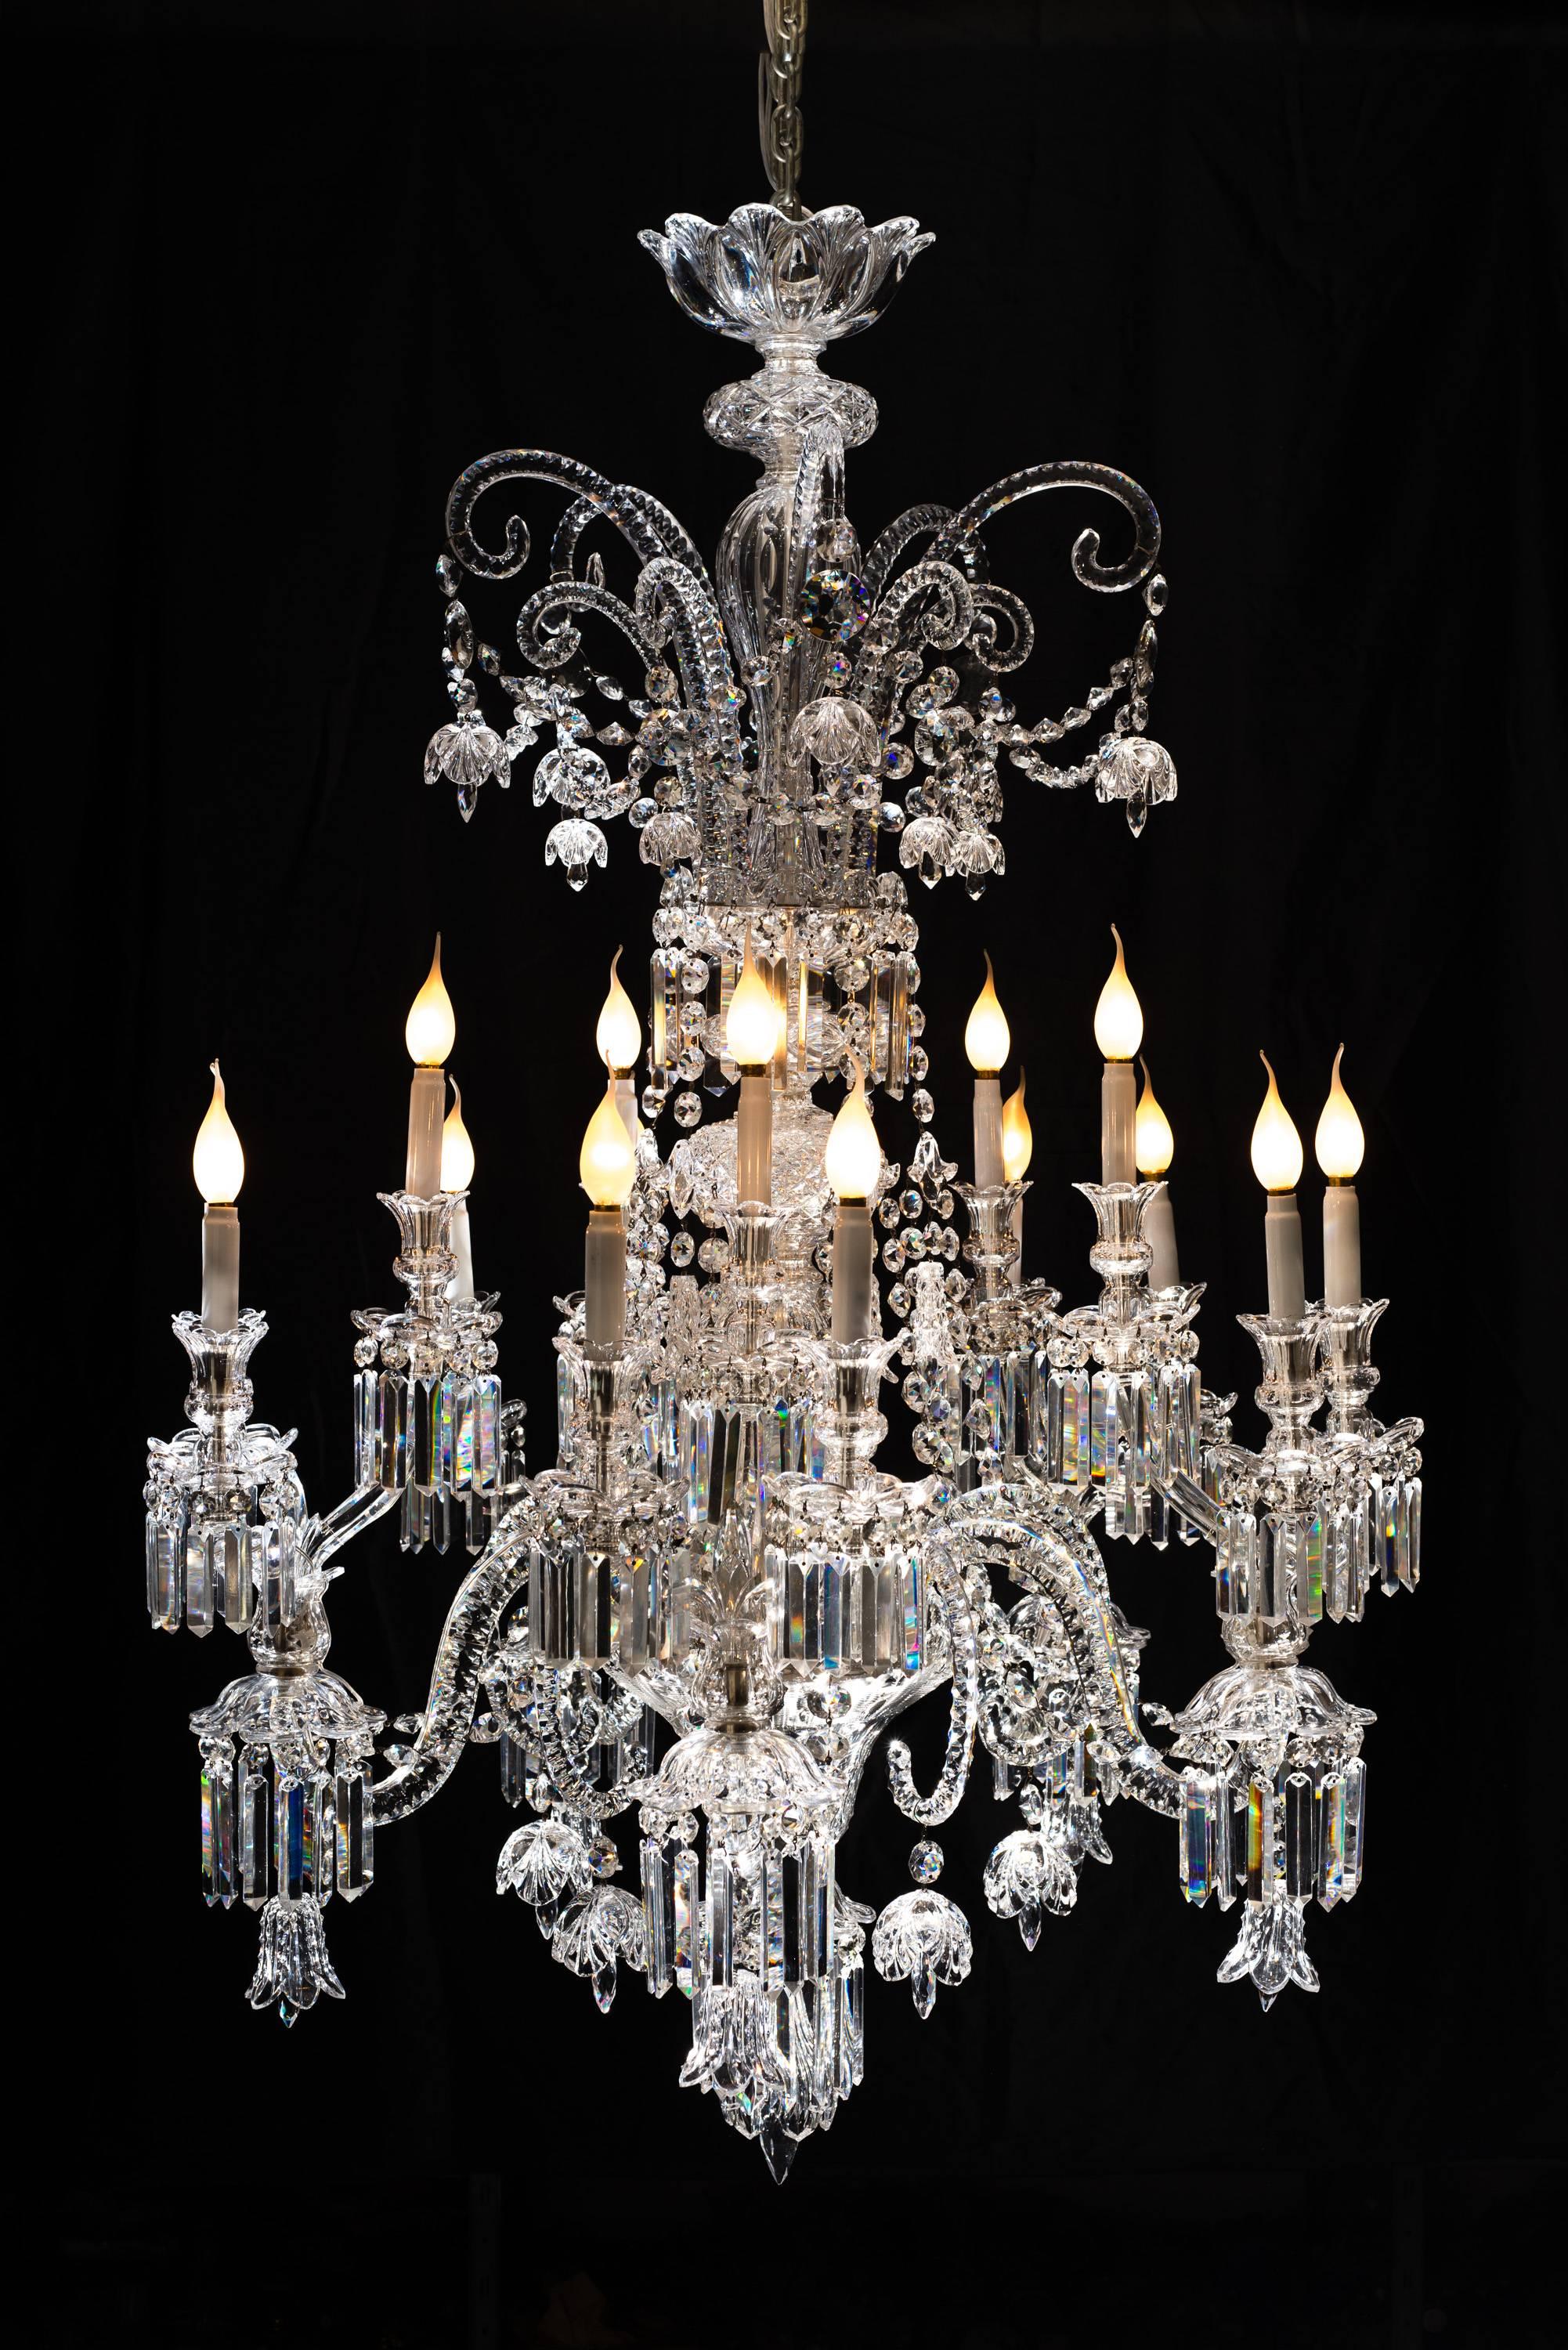 Baccarat Crystal Exceptional Chandelier, France, Early 19th Century For Sale 3